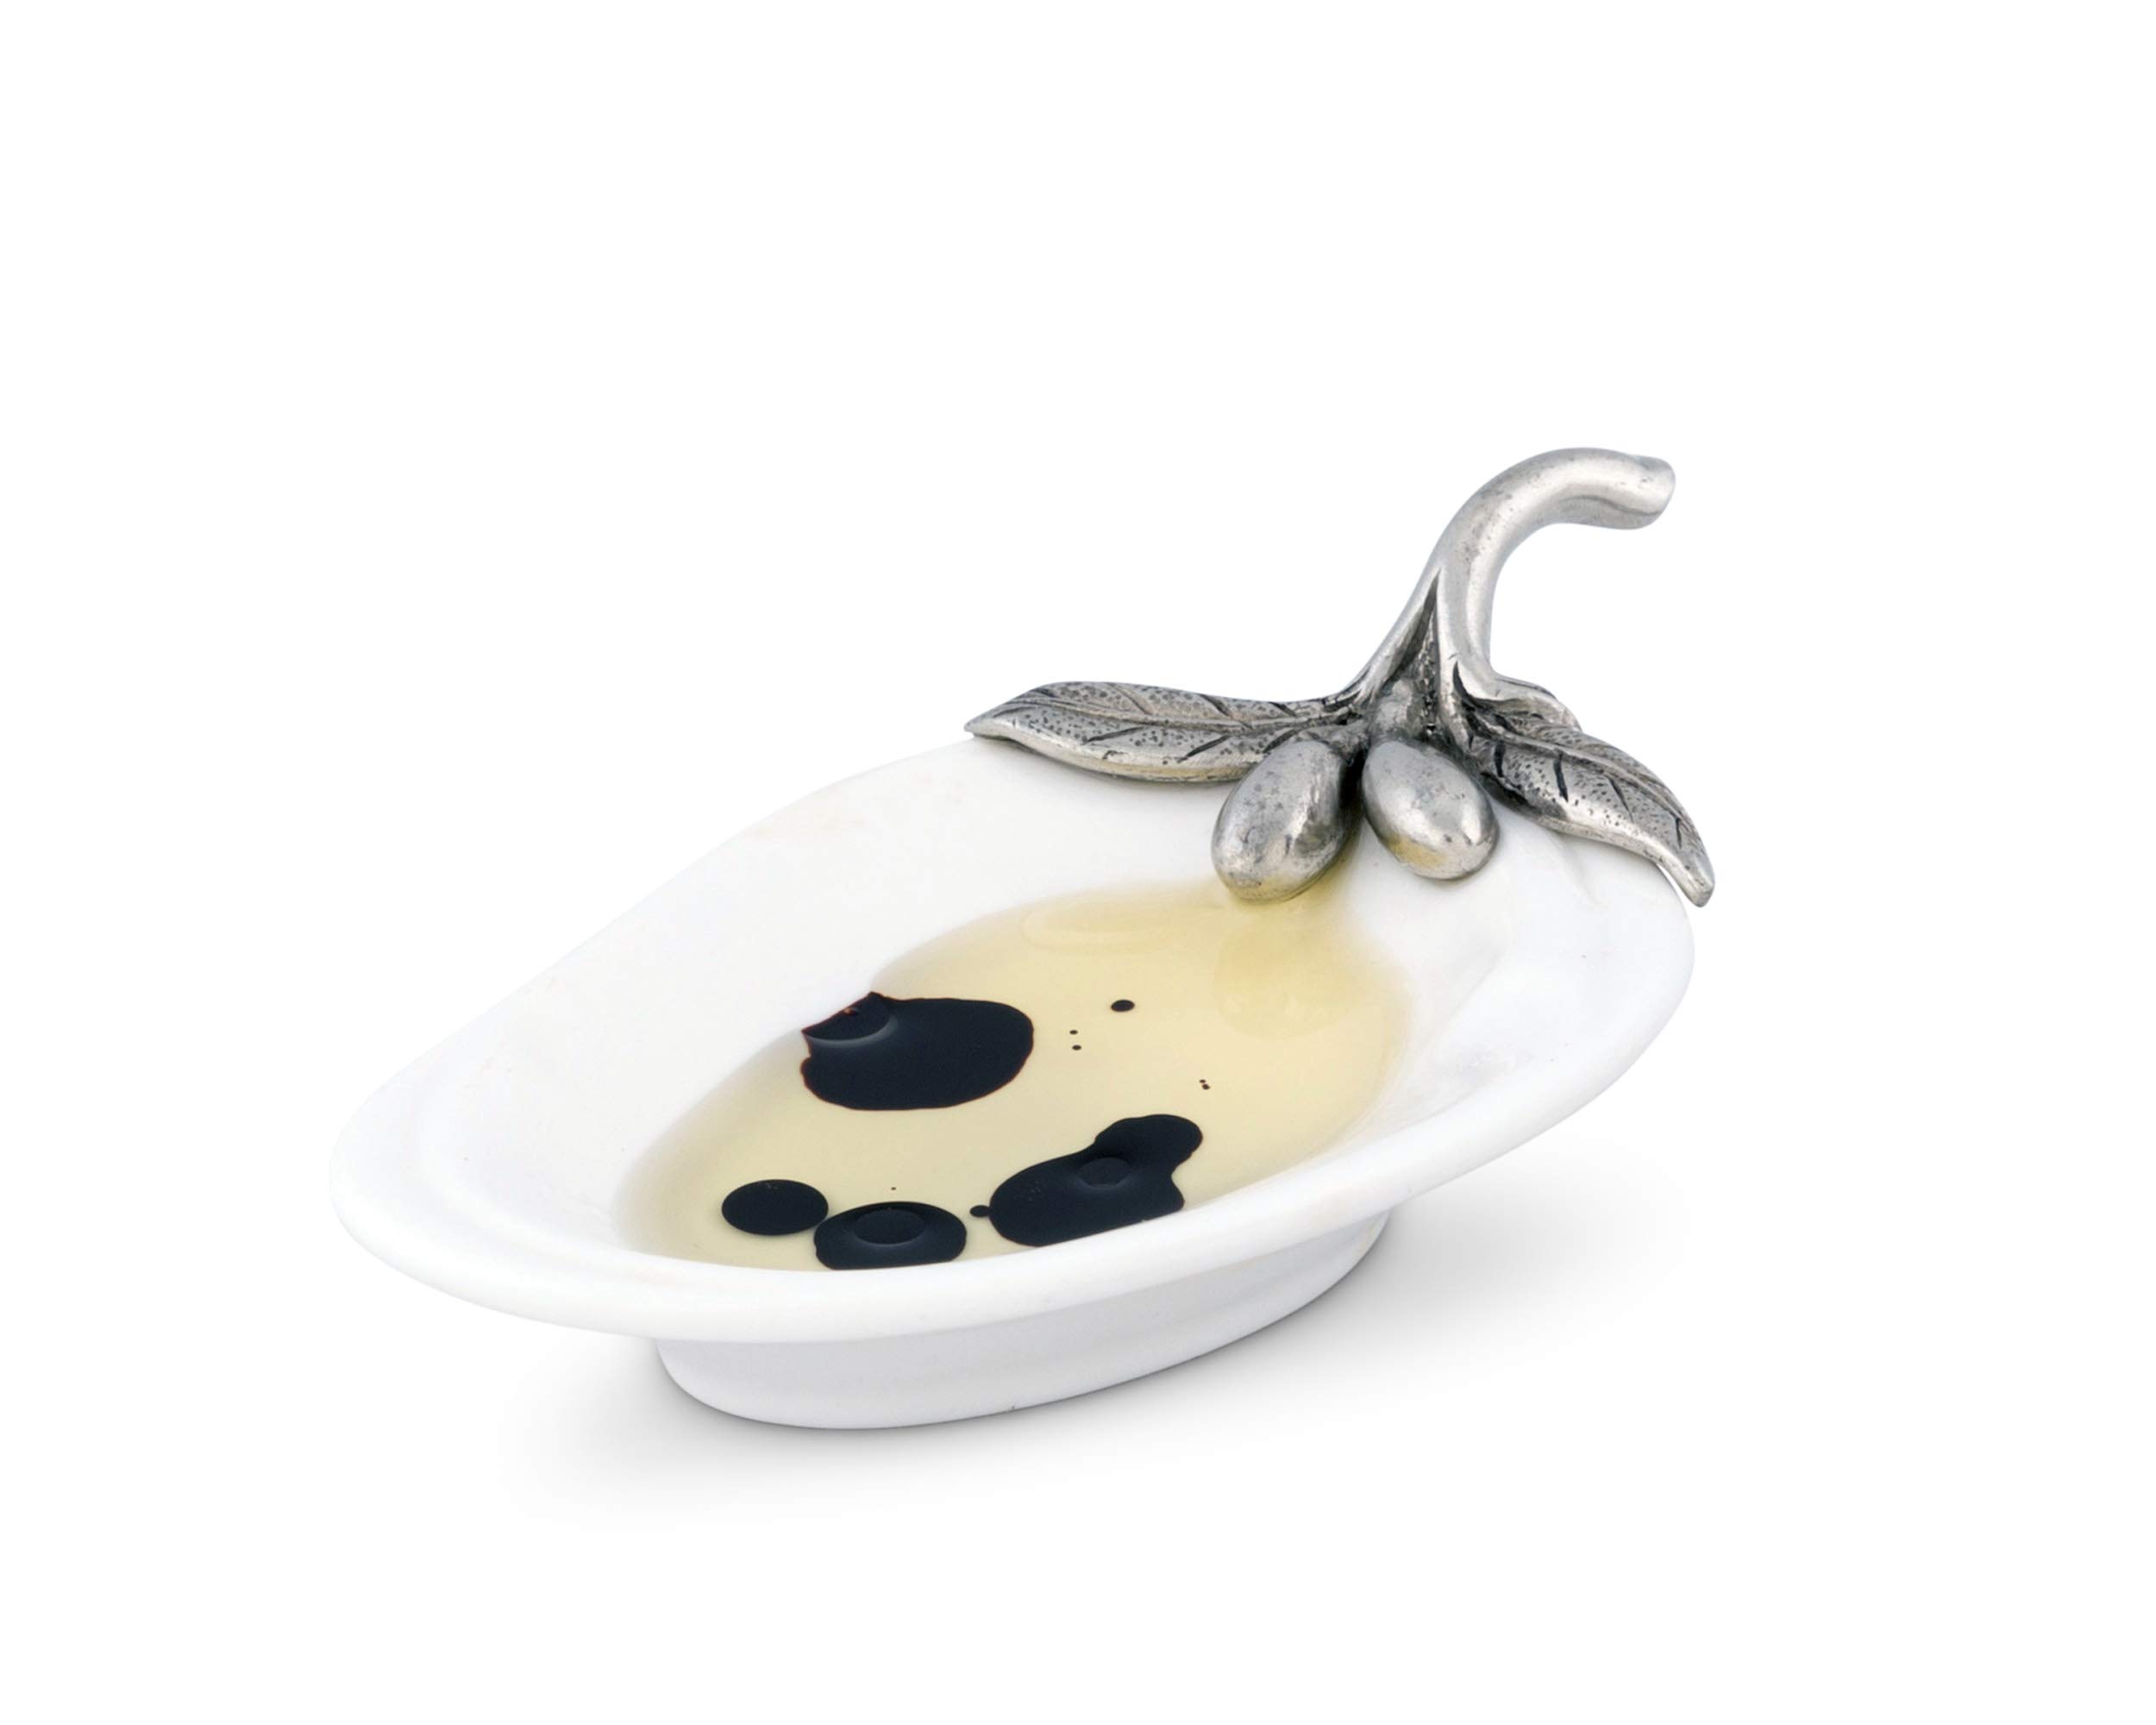 Vagabond House Porcelain Olive/Jam/Oil/Vinegar Server and Spoon Rest with Solid Pewter "Olive Branch" Accent 4.5 inch Long x 2.5 inch Wide